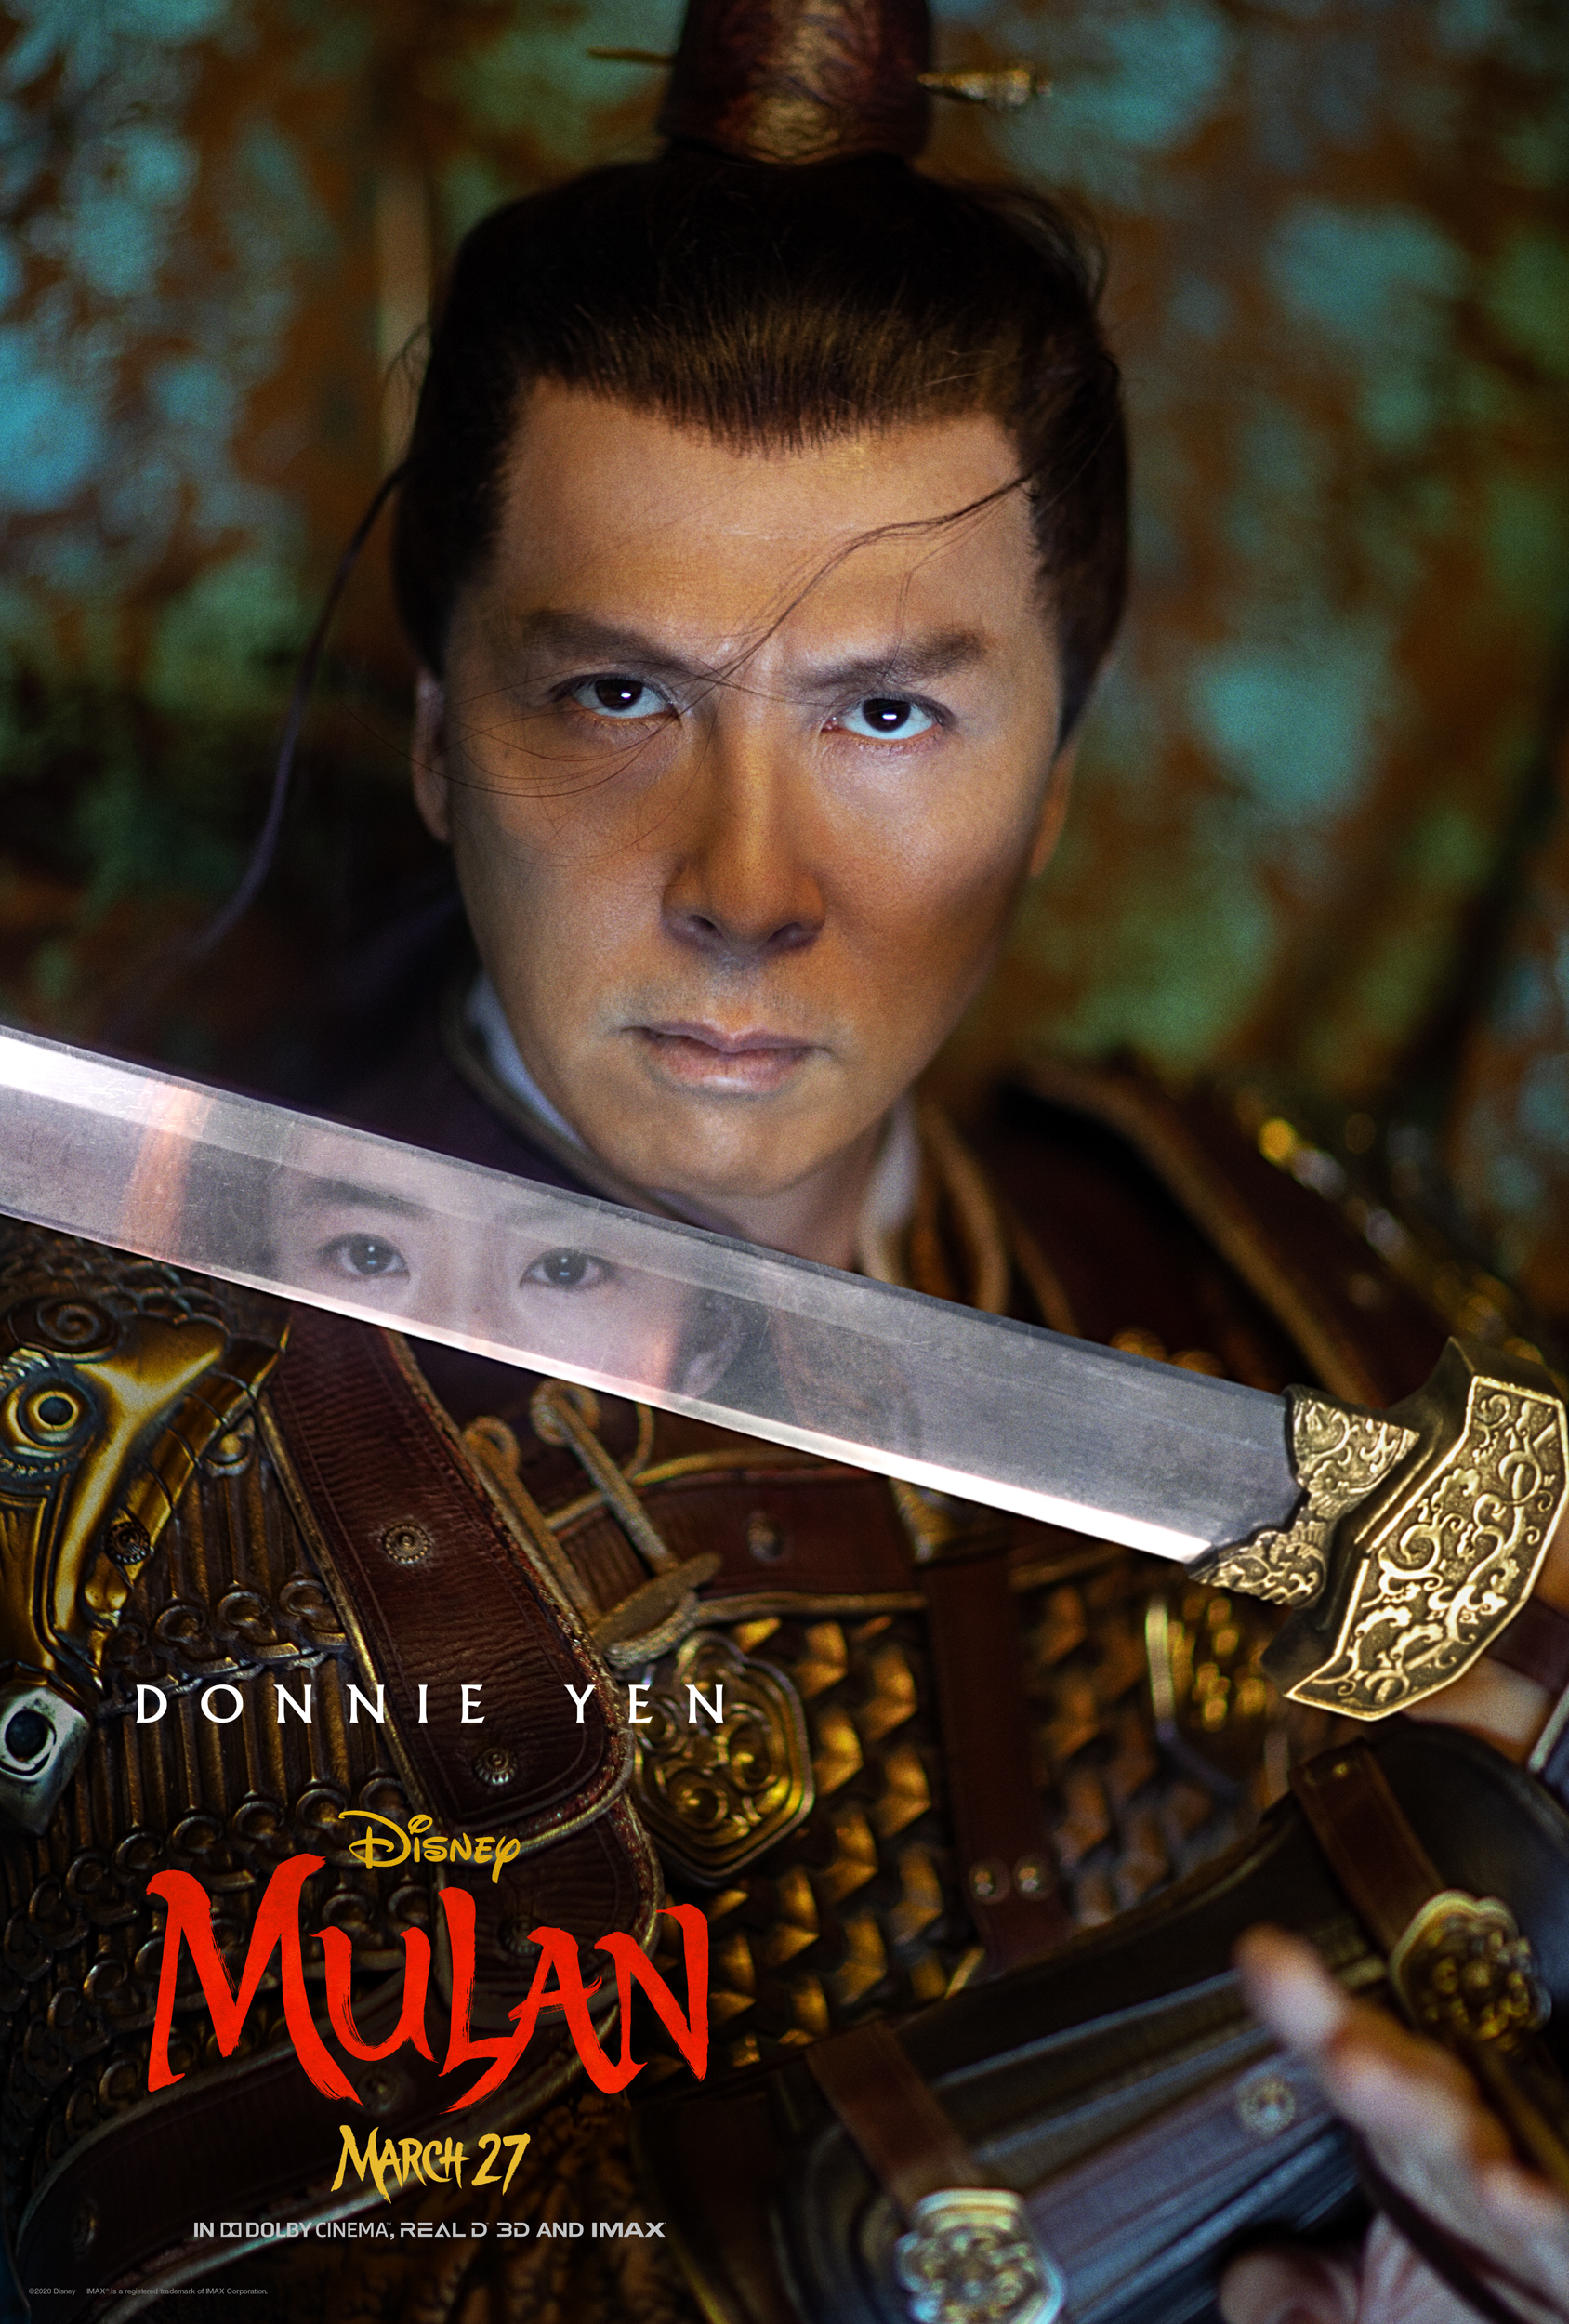 Mulan Character Poster Donnie Yen